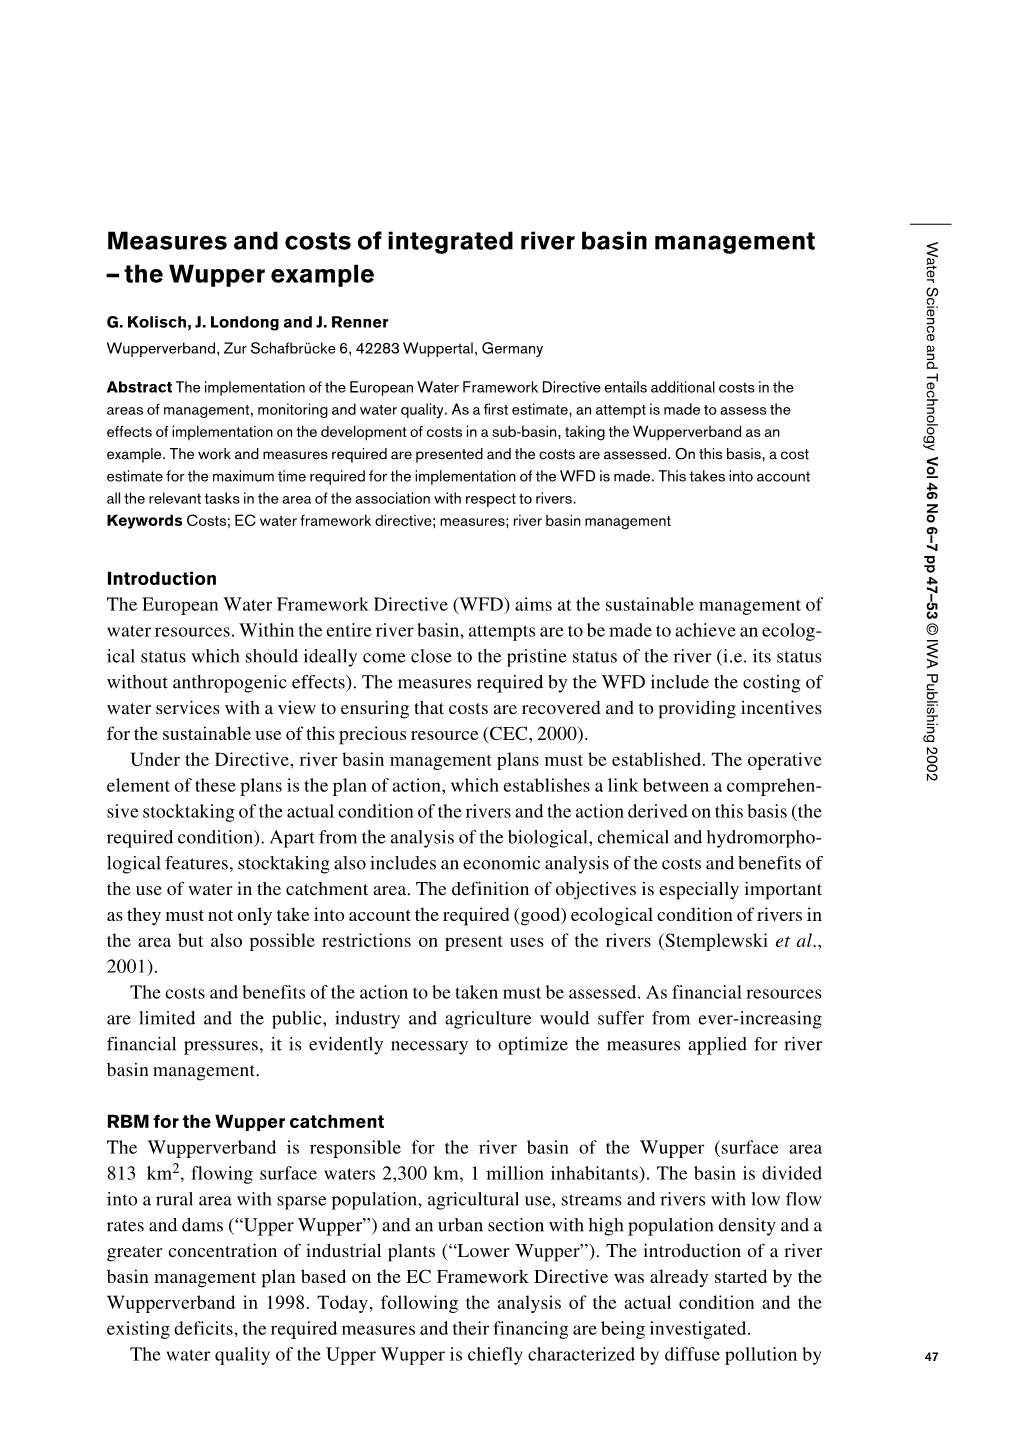 Measures and Costs of Integrated River Basin Management – the Wupper